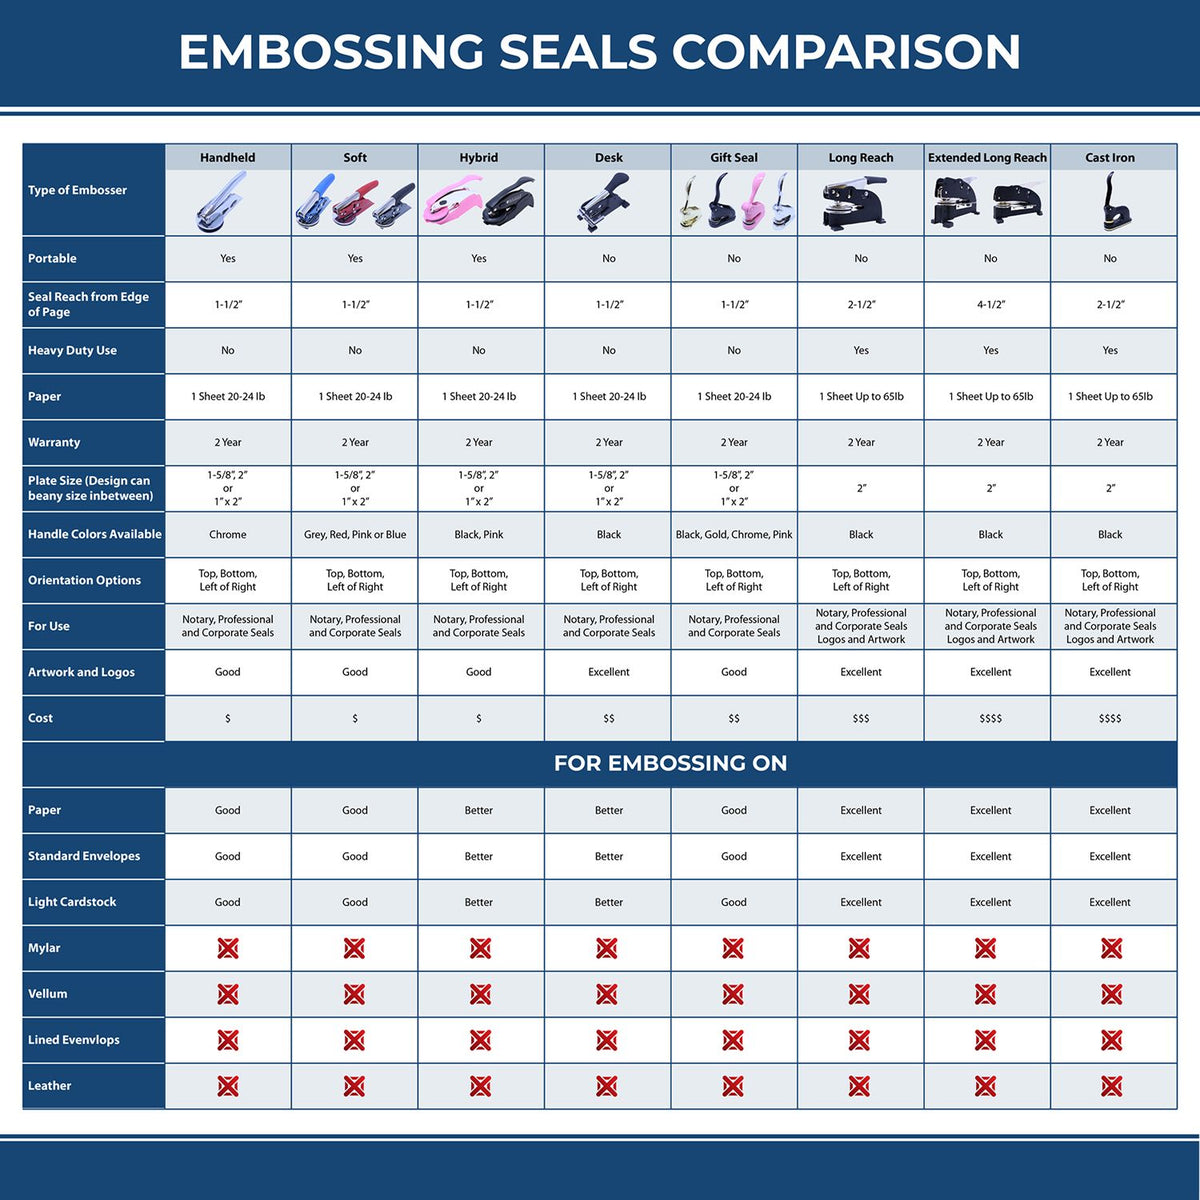 A comparison chart for the different types of mount models available for the Handheld Arkansas Professional Engineer Embosser.